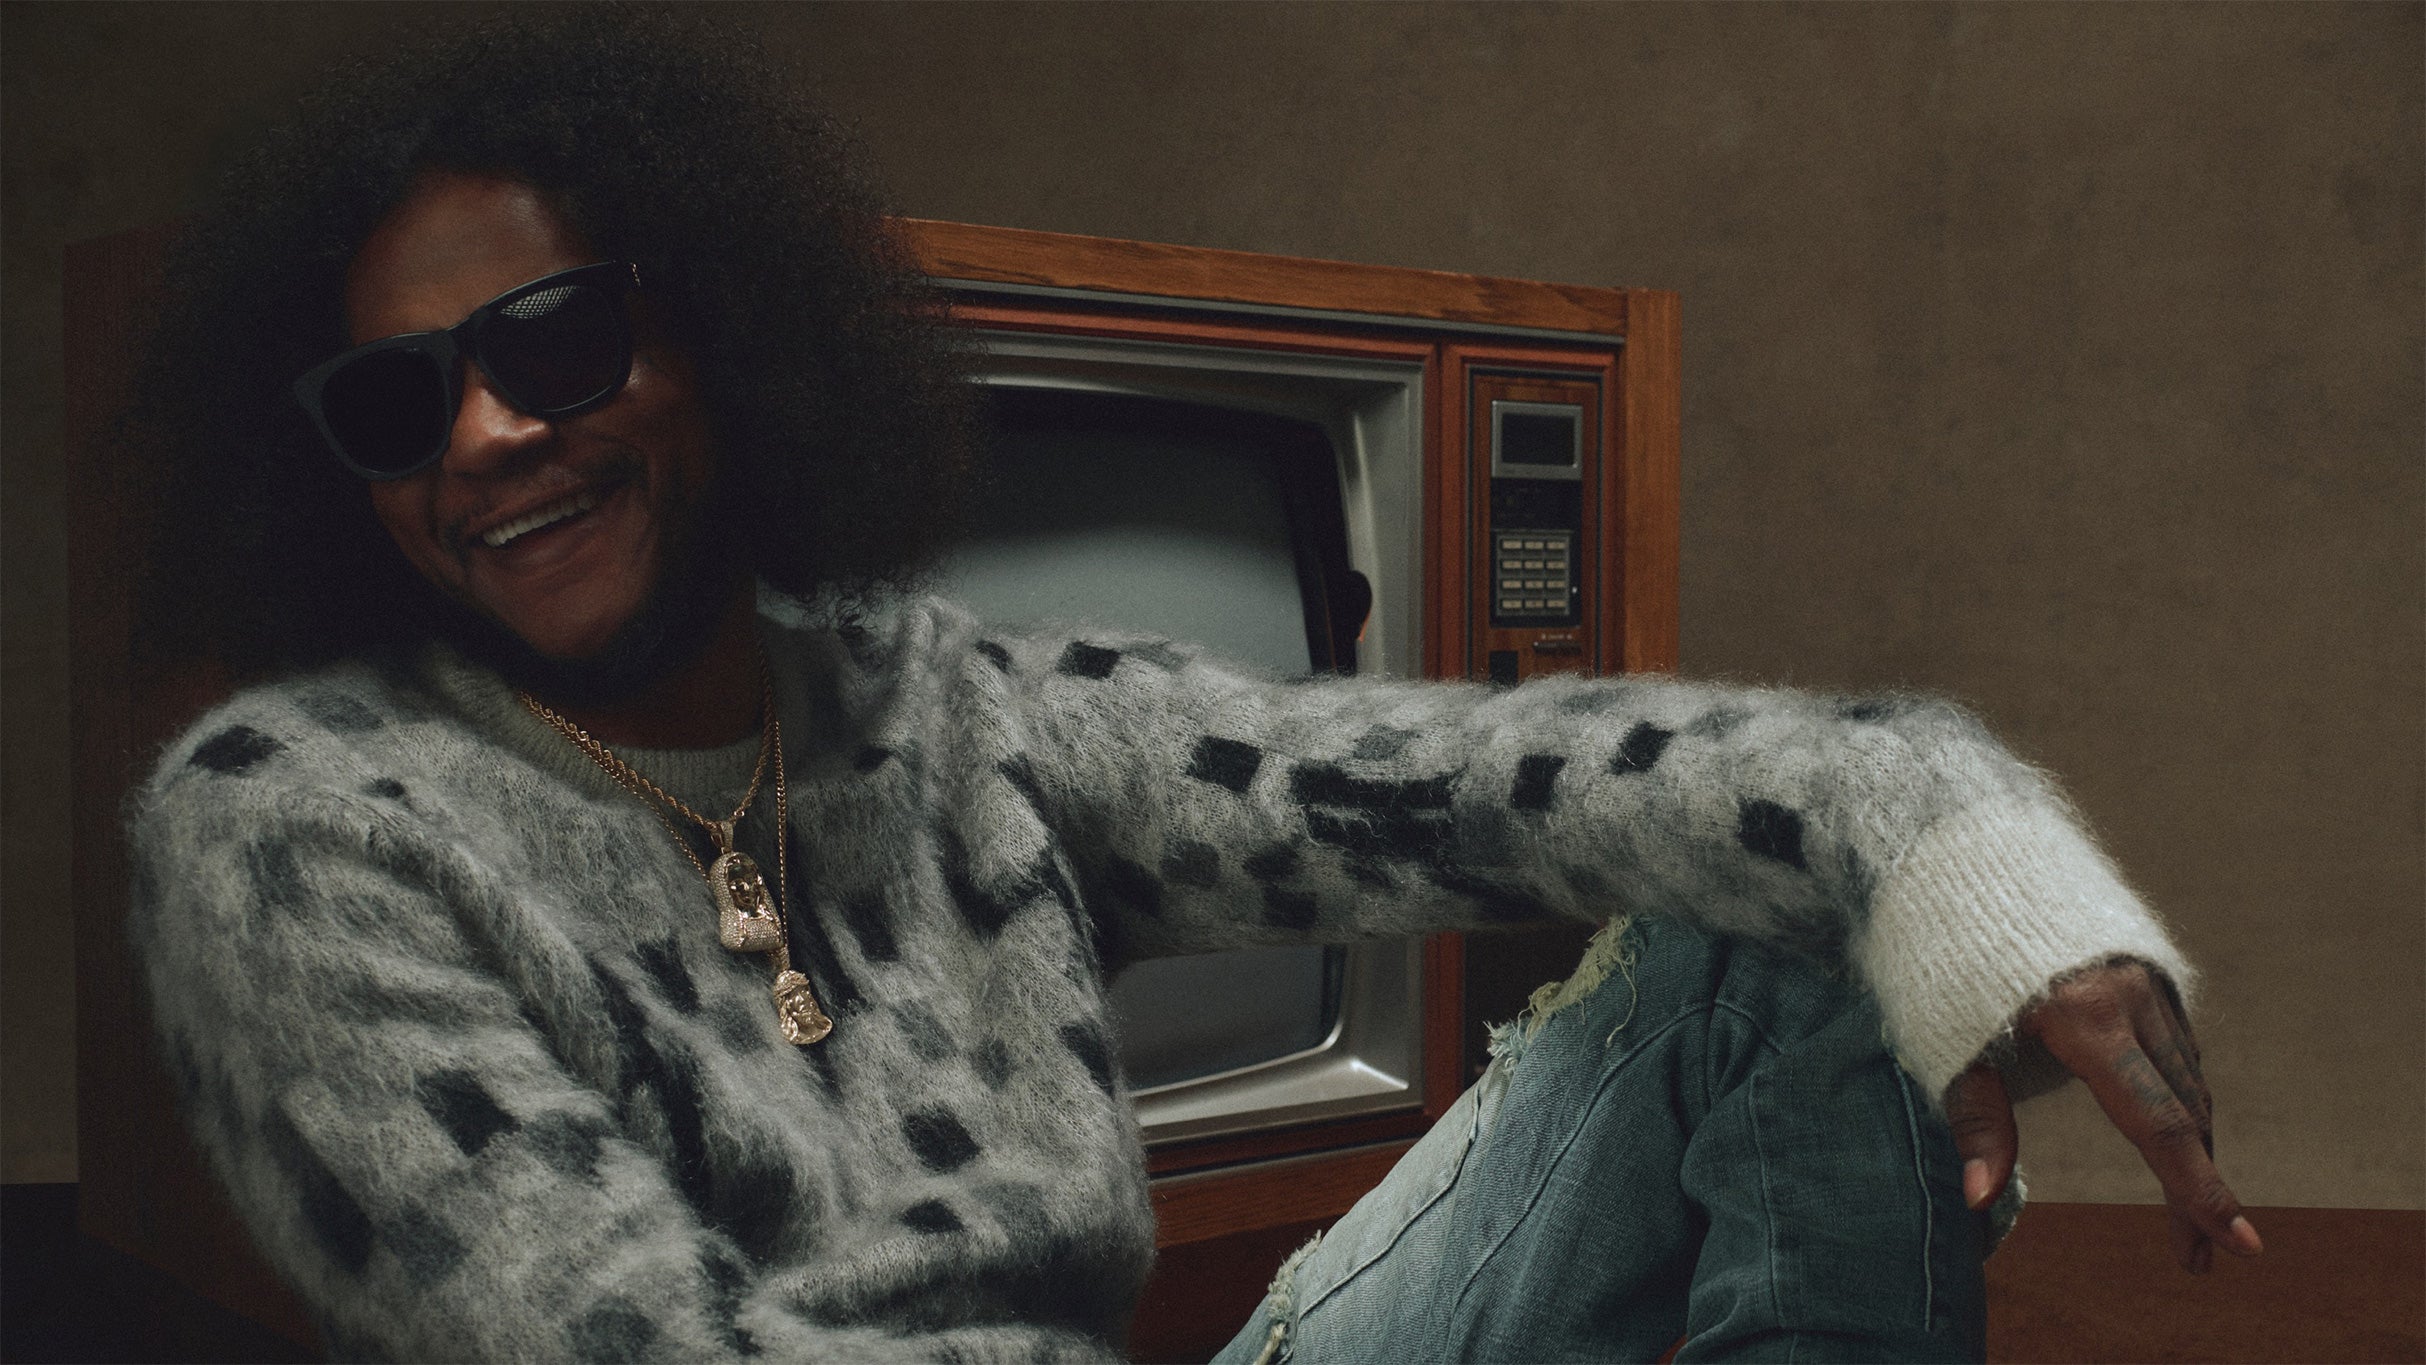 Ab-Soul - The Intelligent Movement Tour presale code for your tickets in Houston